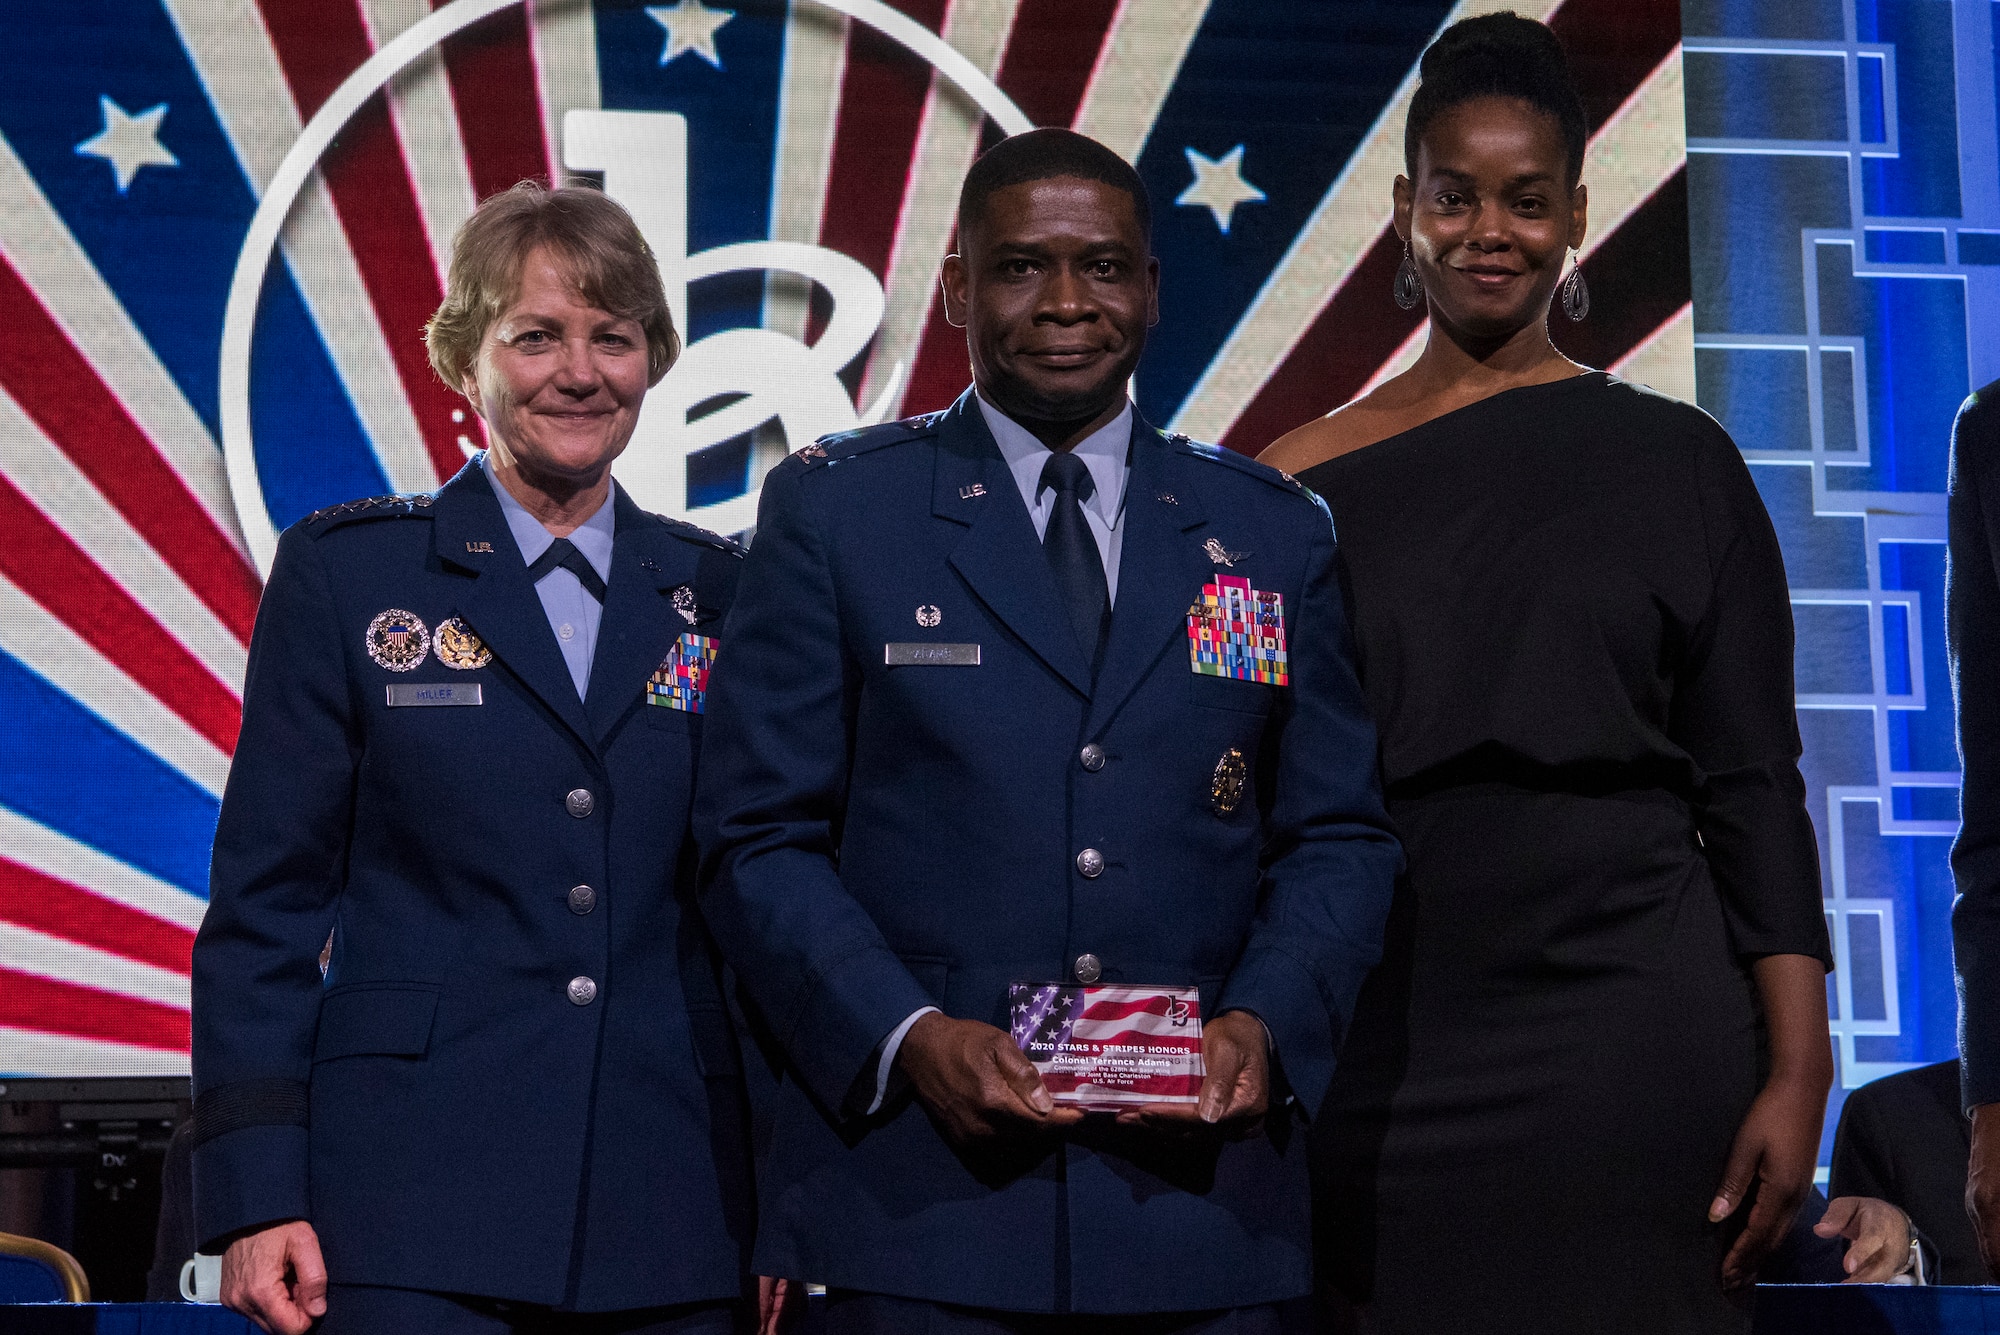 Col. Terrance A. Adams, commander of the 628th Air Base Wing and Joint Base Charleston, S.C., along with his sister, Felicia Johnson, accepted the Military Service Award from Gen. Maryanne Miller, Air Mobility Command commander, at the 2020 Black Engineer of the Year Stars and Stripes dinner, Feb. 14, 2020, Washington, D.C. Adams earned the award for his more than 14 years of service to BEYA and over 5,000 students reached. (U.S. Air Force photo by Staff Sgt. James Richardson)